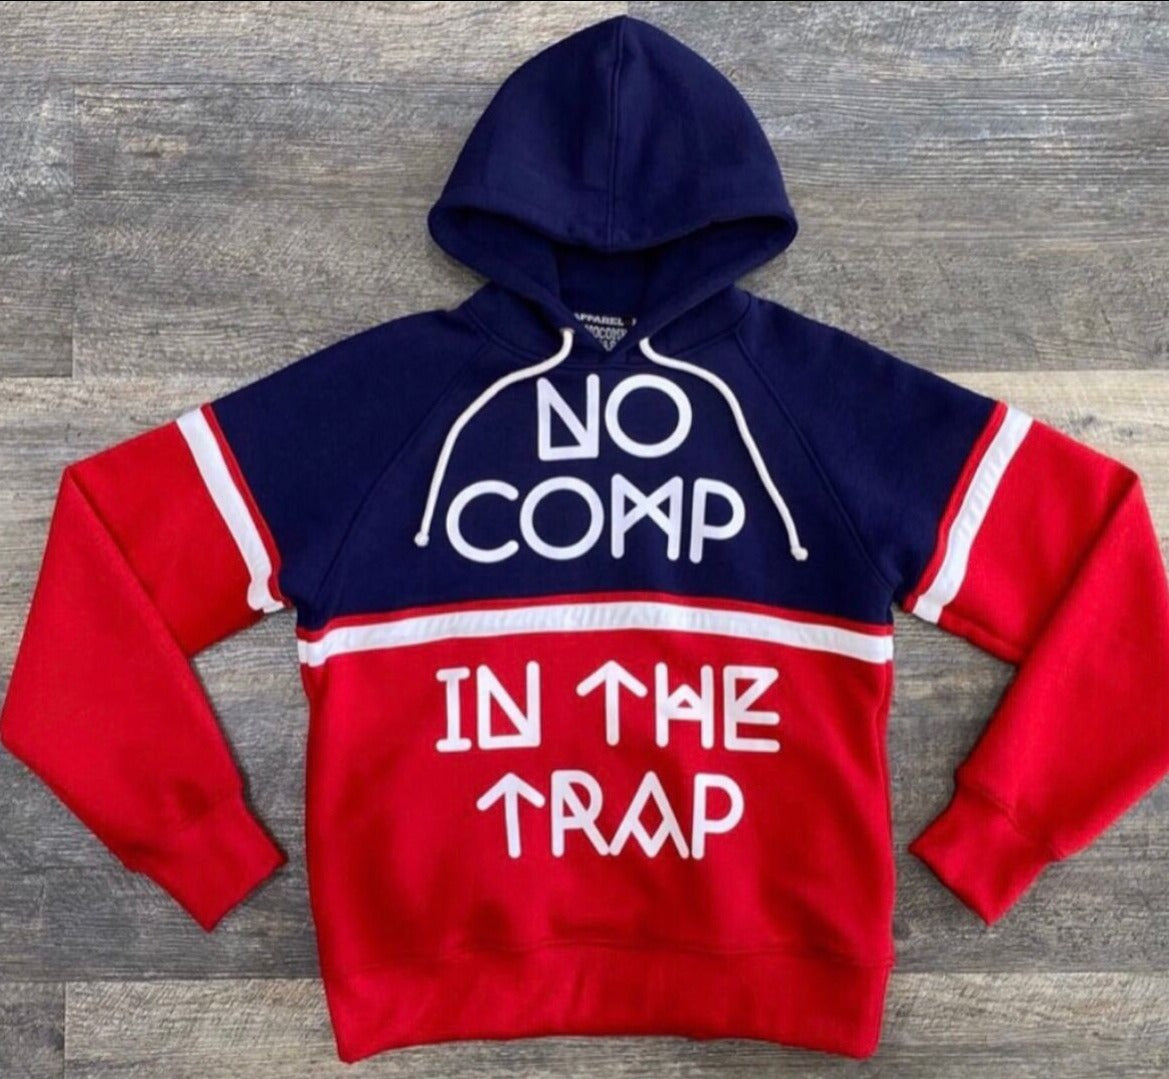 NoComp! "IN THE TRAP" Men's Red & Blue Hoodie